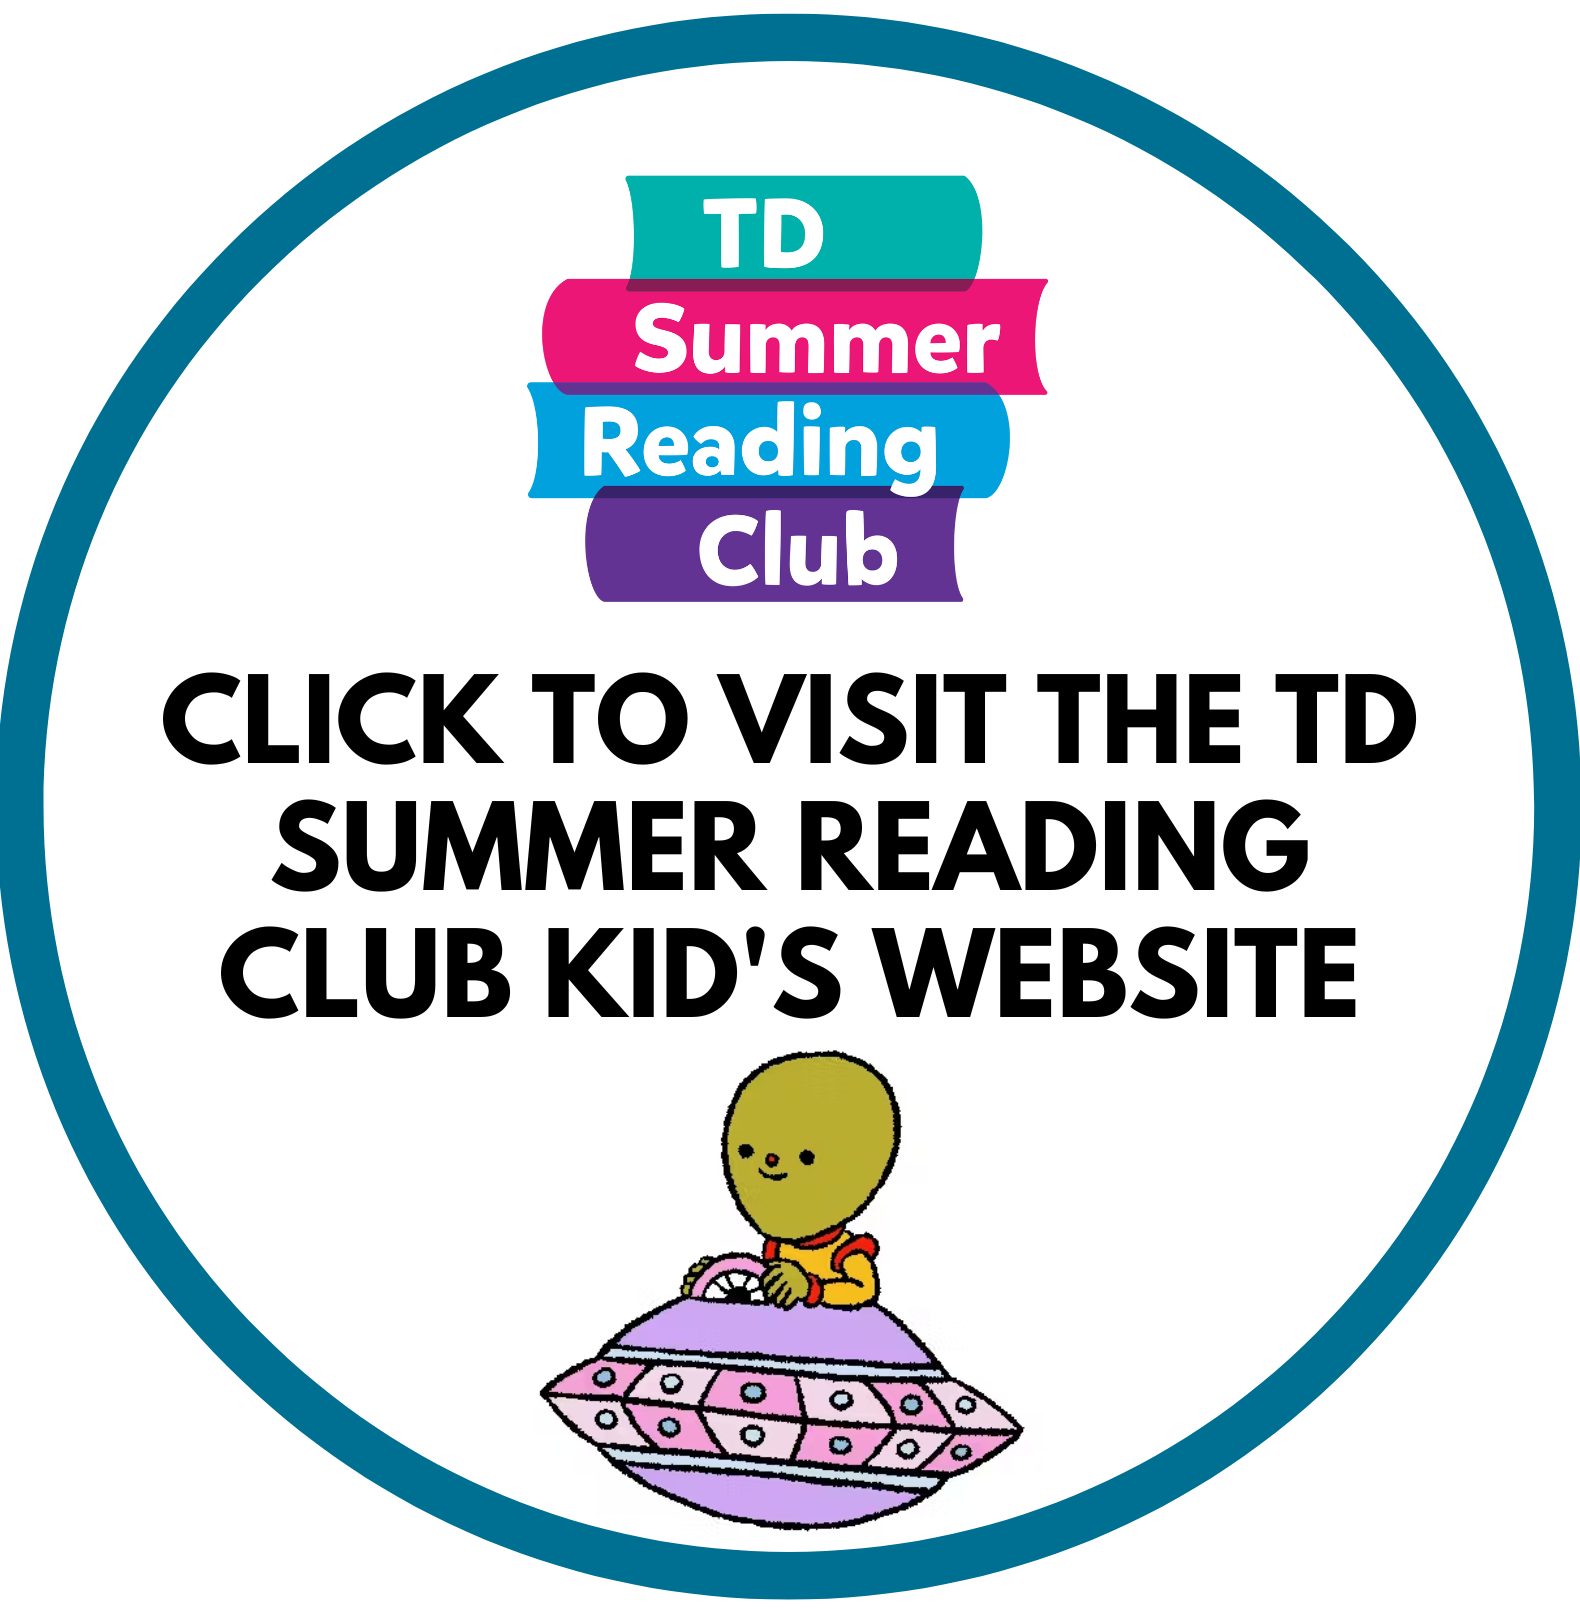 Click to visit the TD Summer Reading Club Kid's Website